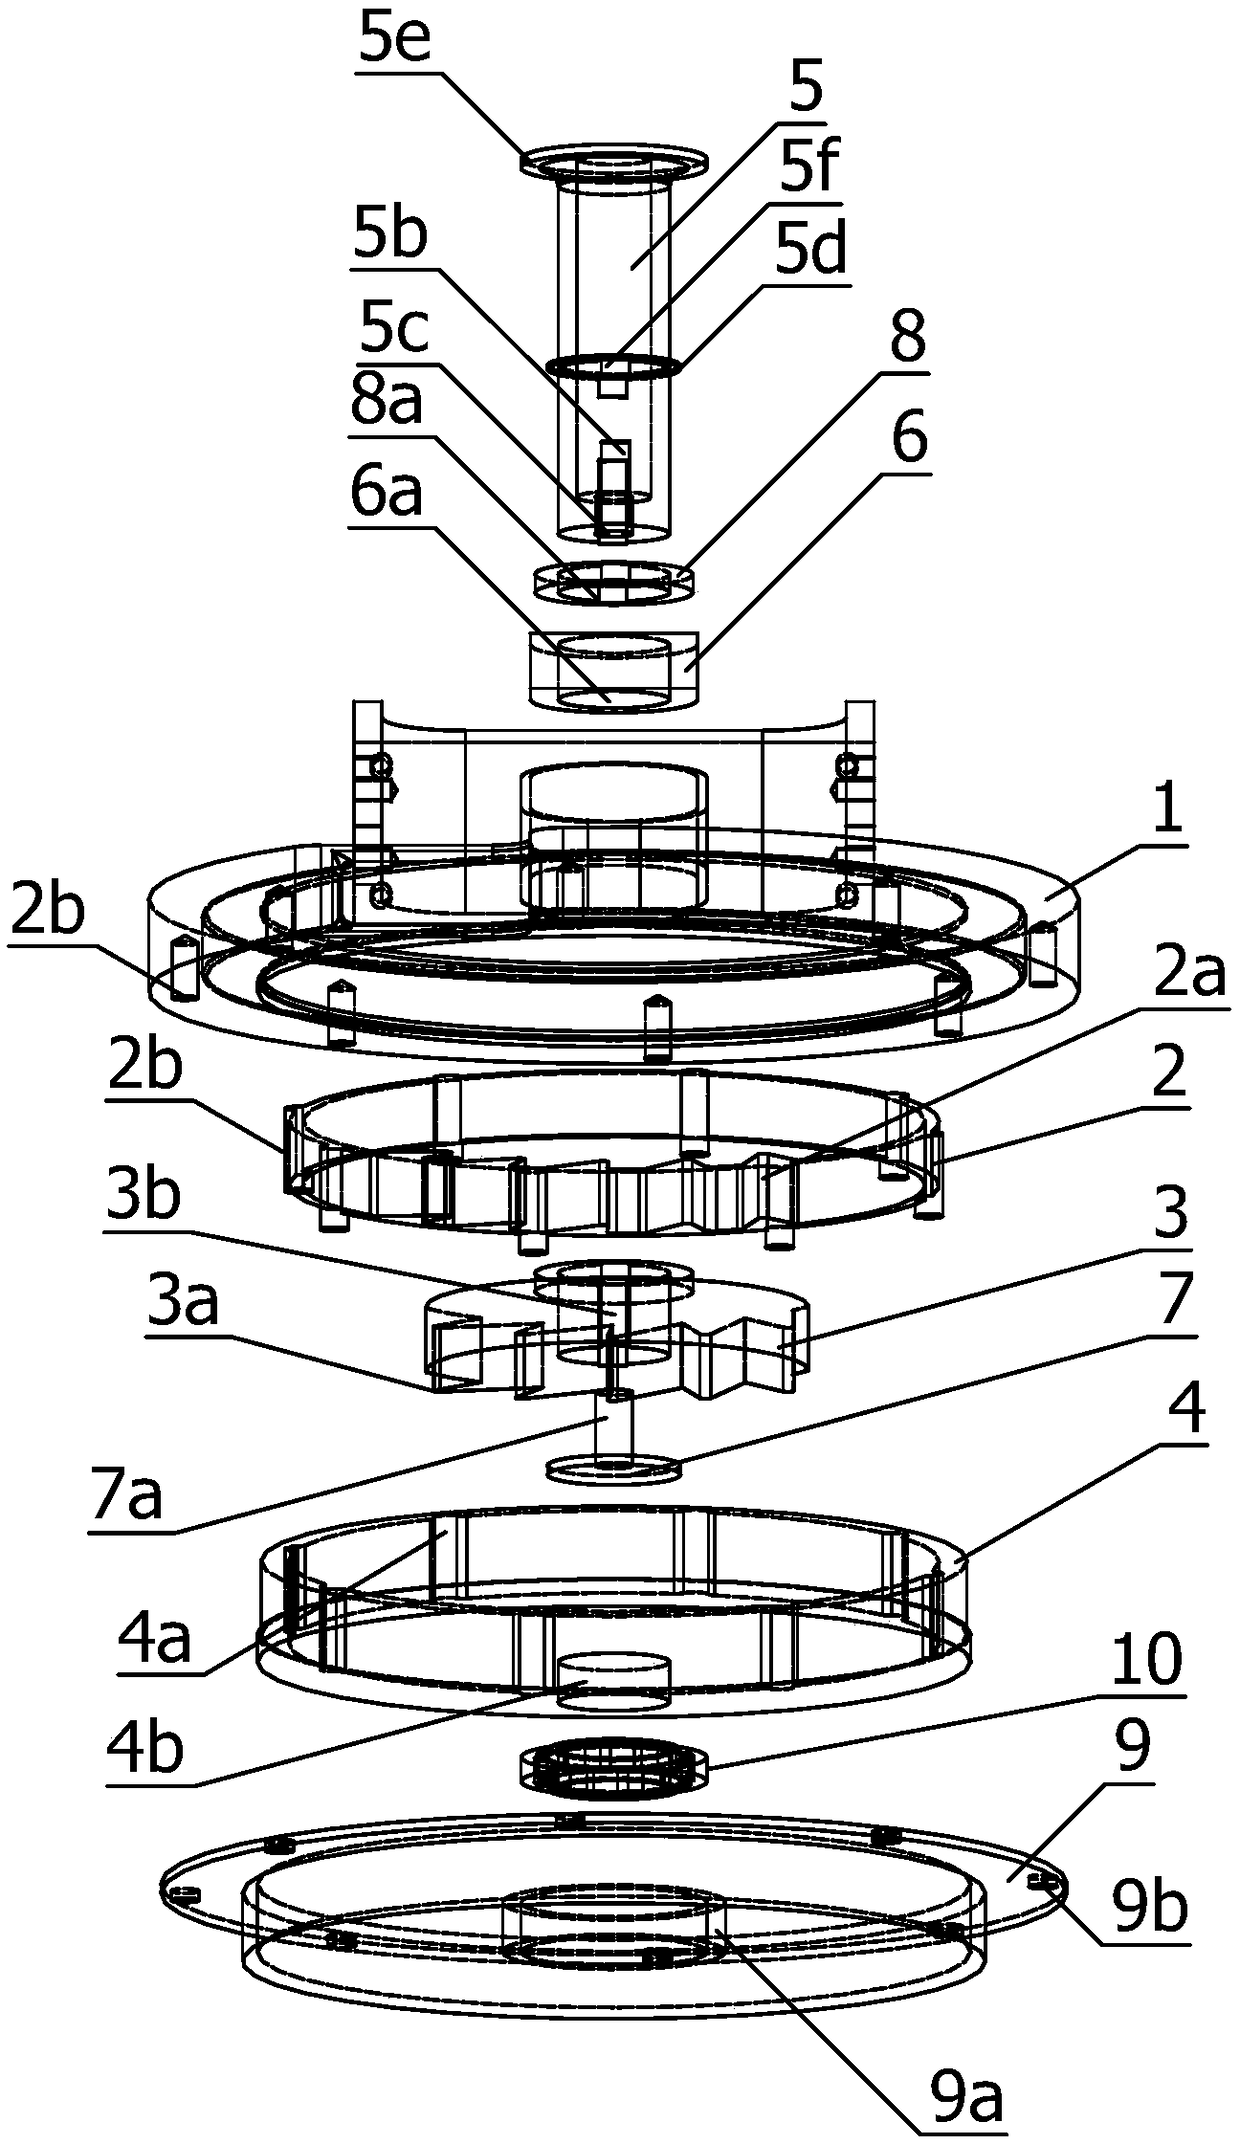 A self-adjusting cable tensioning device